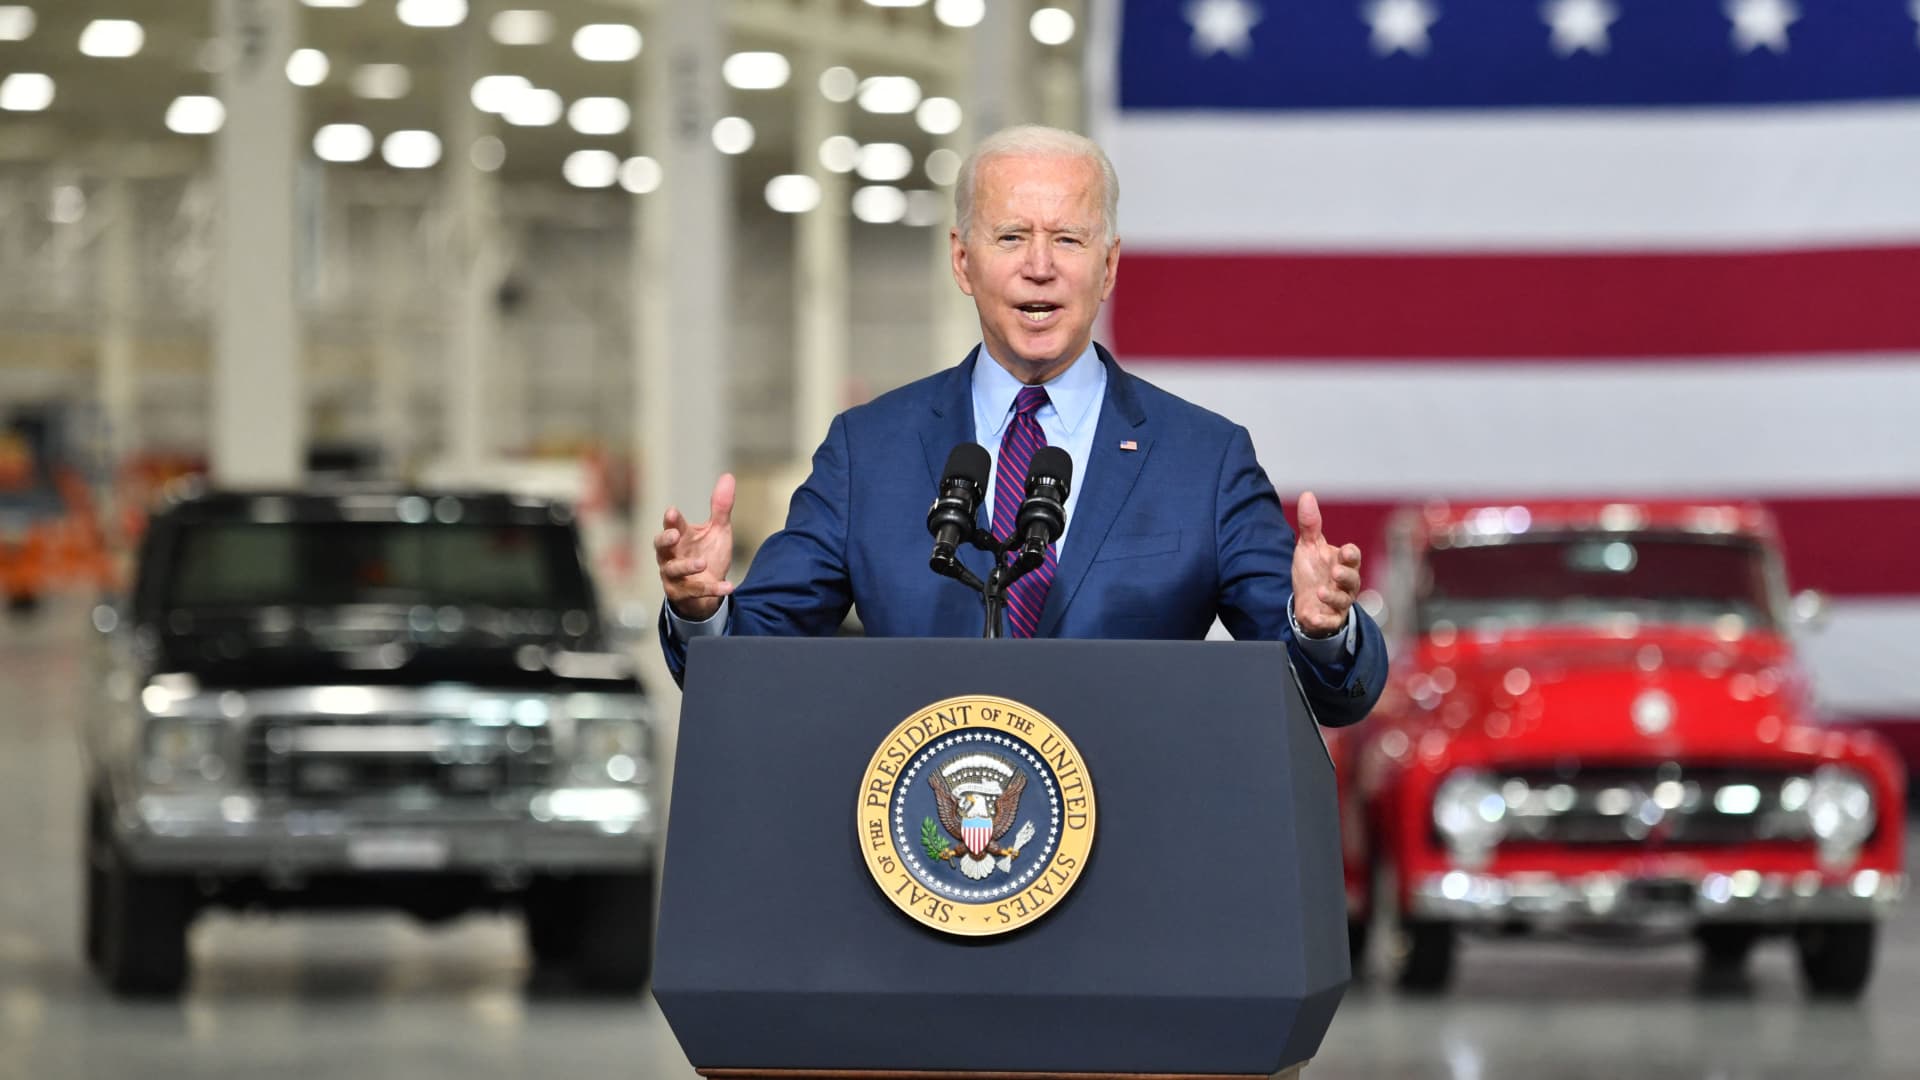 President Joe Biden delivers remarks at the Ford Rouge Electric Vehicle Center, in Dearborn, Michigan on May 18, 2021.